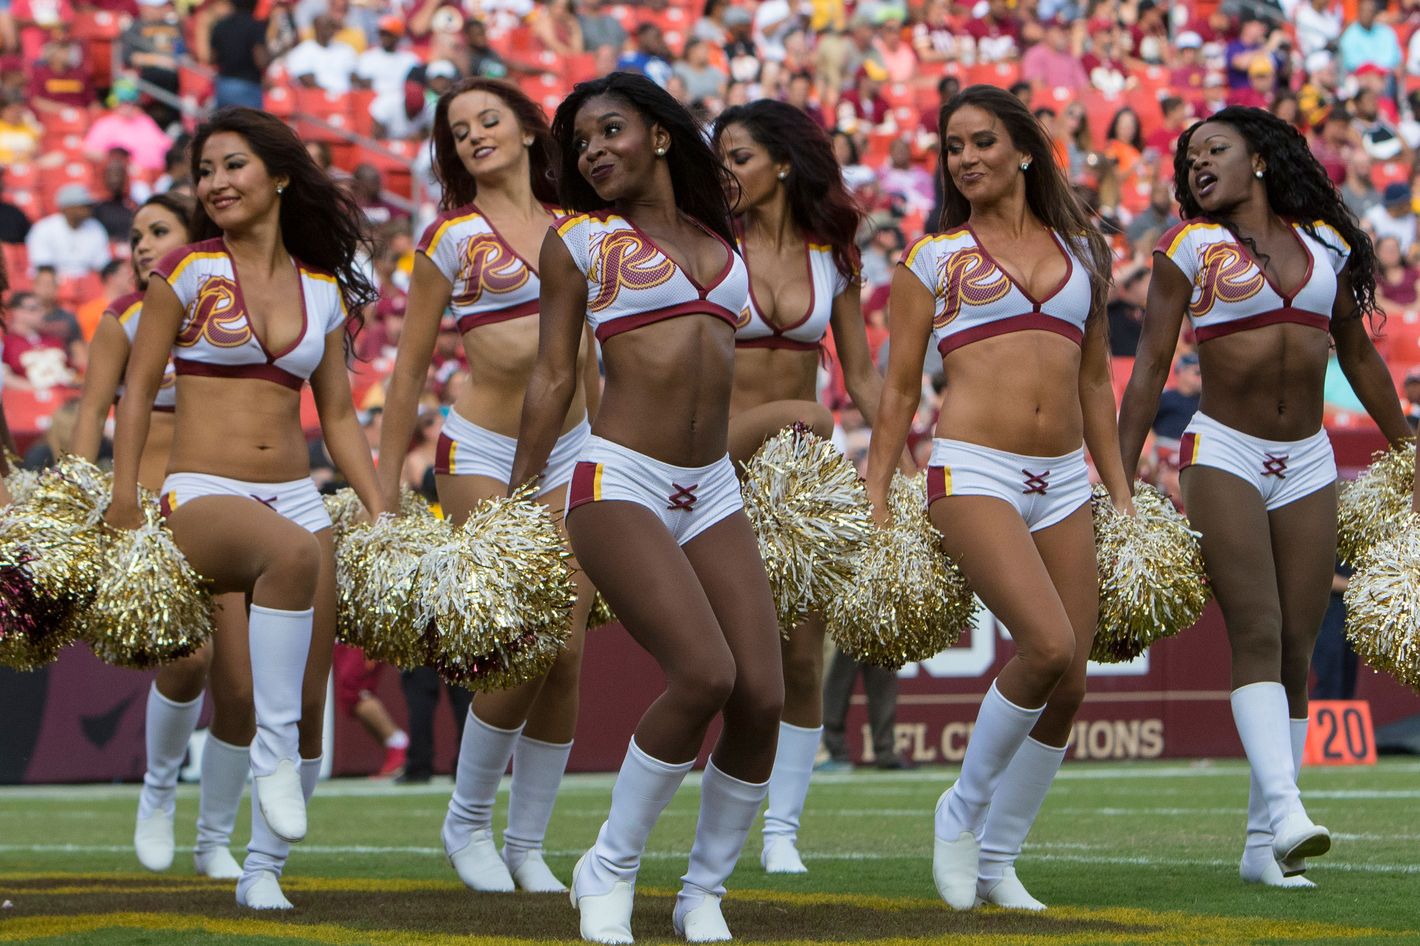 Redskins Cheerleaders Say They Were Made to Serve as Escorts